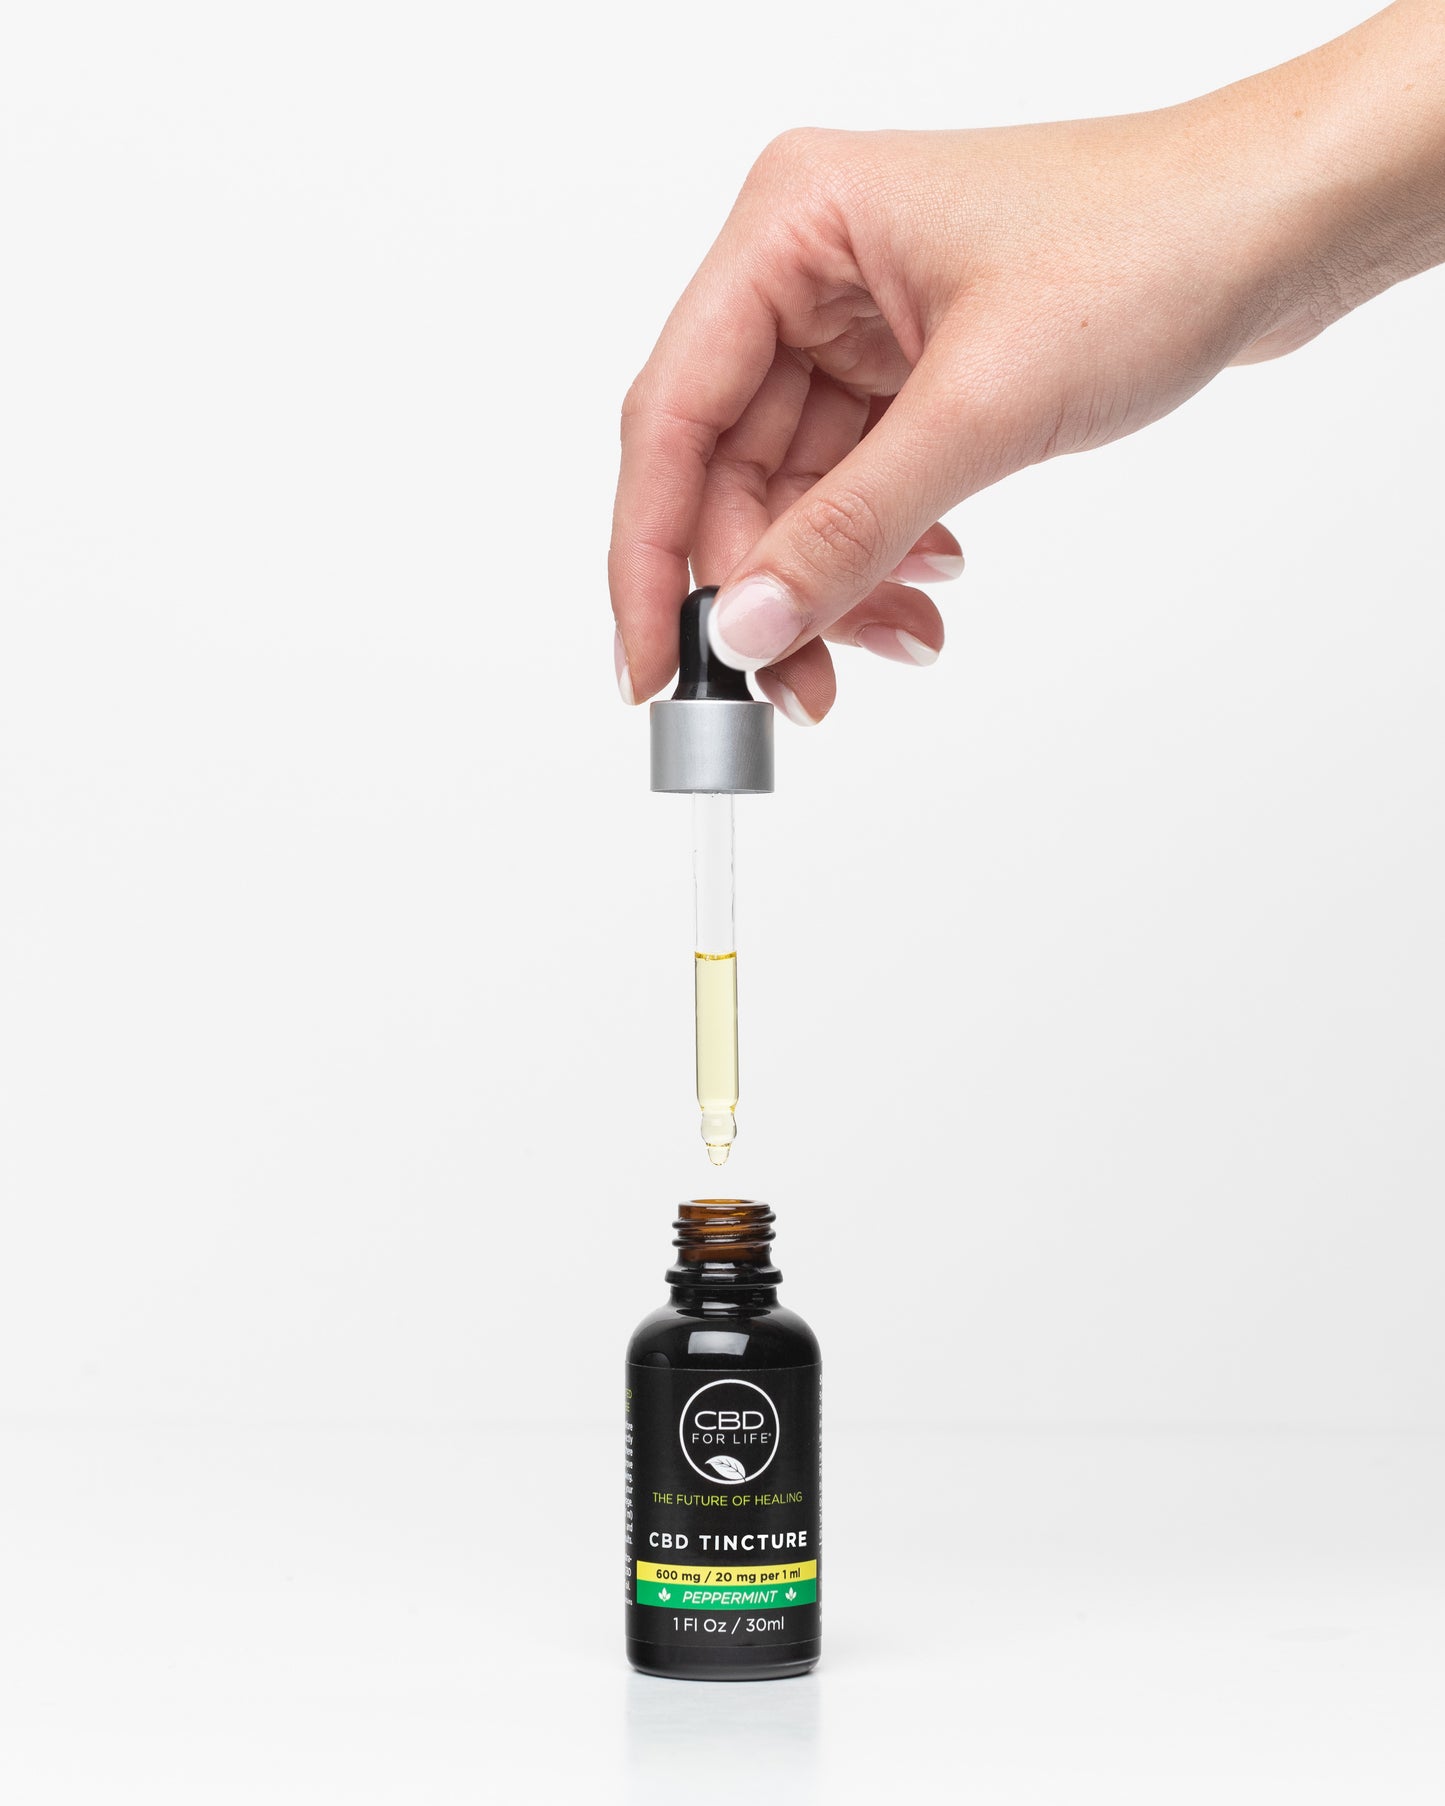 The thing about CBD peppermint oil is that it naturally interacts with the body. Since CBD is a cannabinoid, it plays nice with our endocannabinoid system, which is the system responsible for helping our bodies reach homeostasis